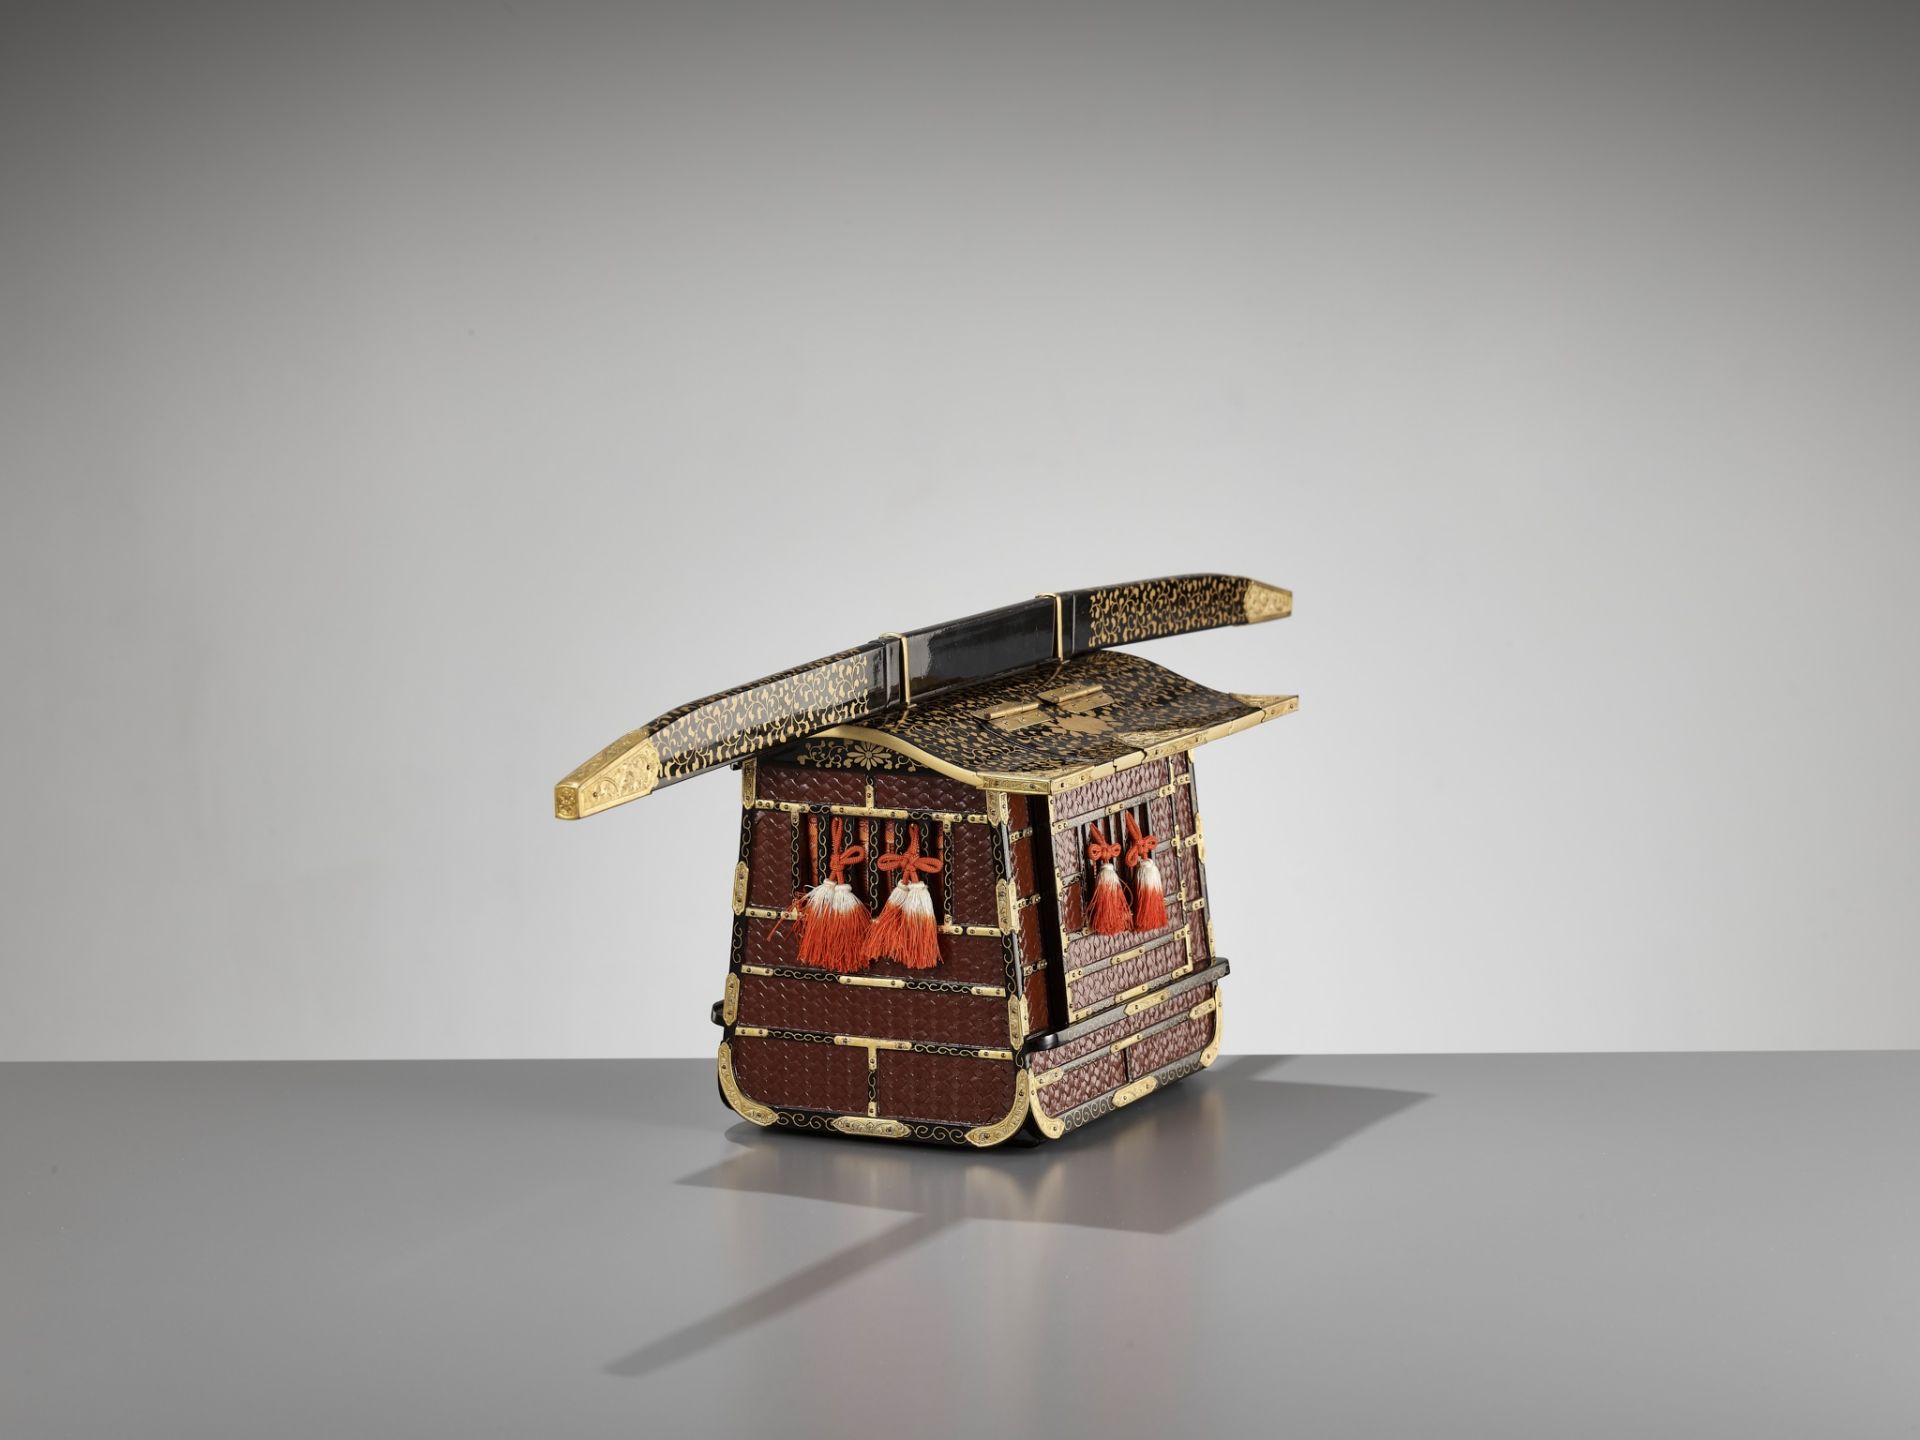 A LACQUER MINIATURE KAGO (PALANQUIN) - Image 7 of 14